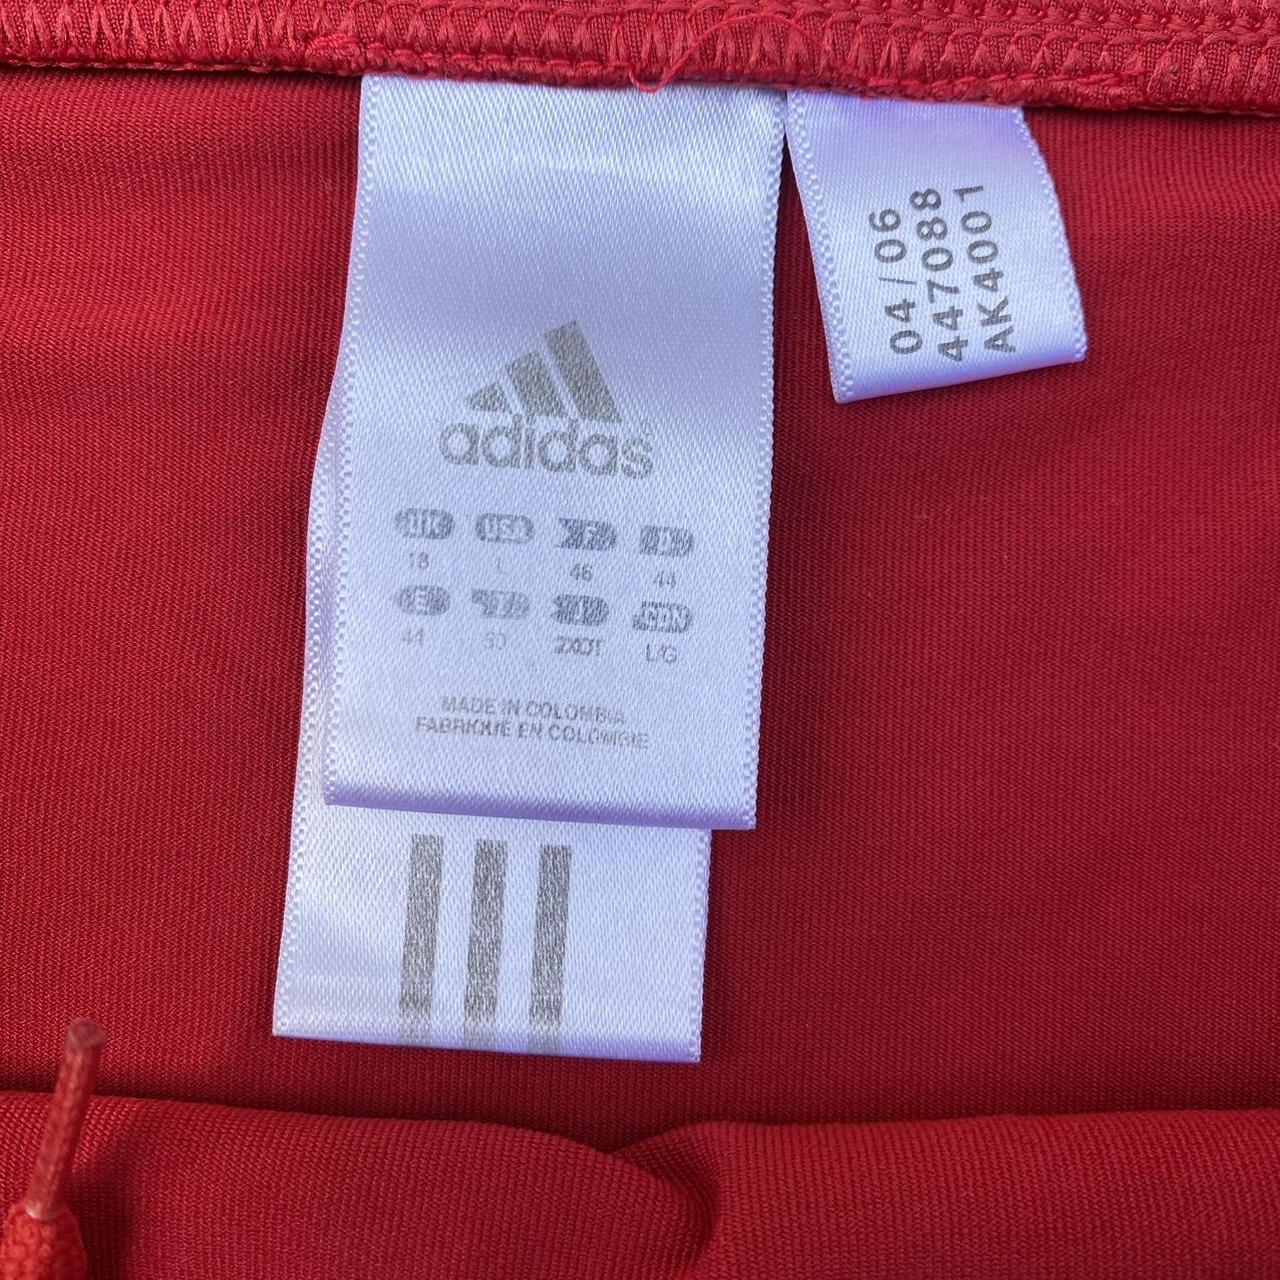 Adidas Women's Red and White Shorts (3)